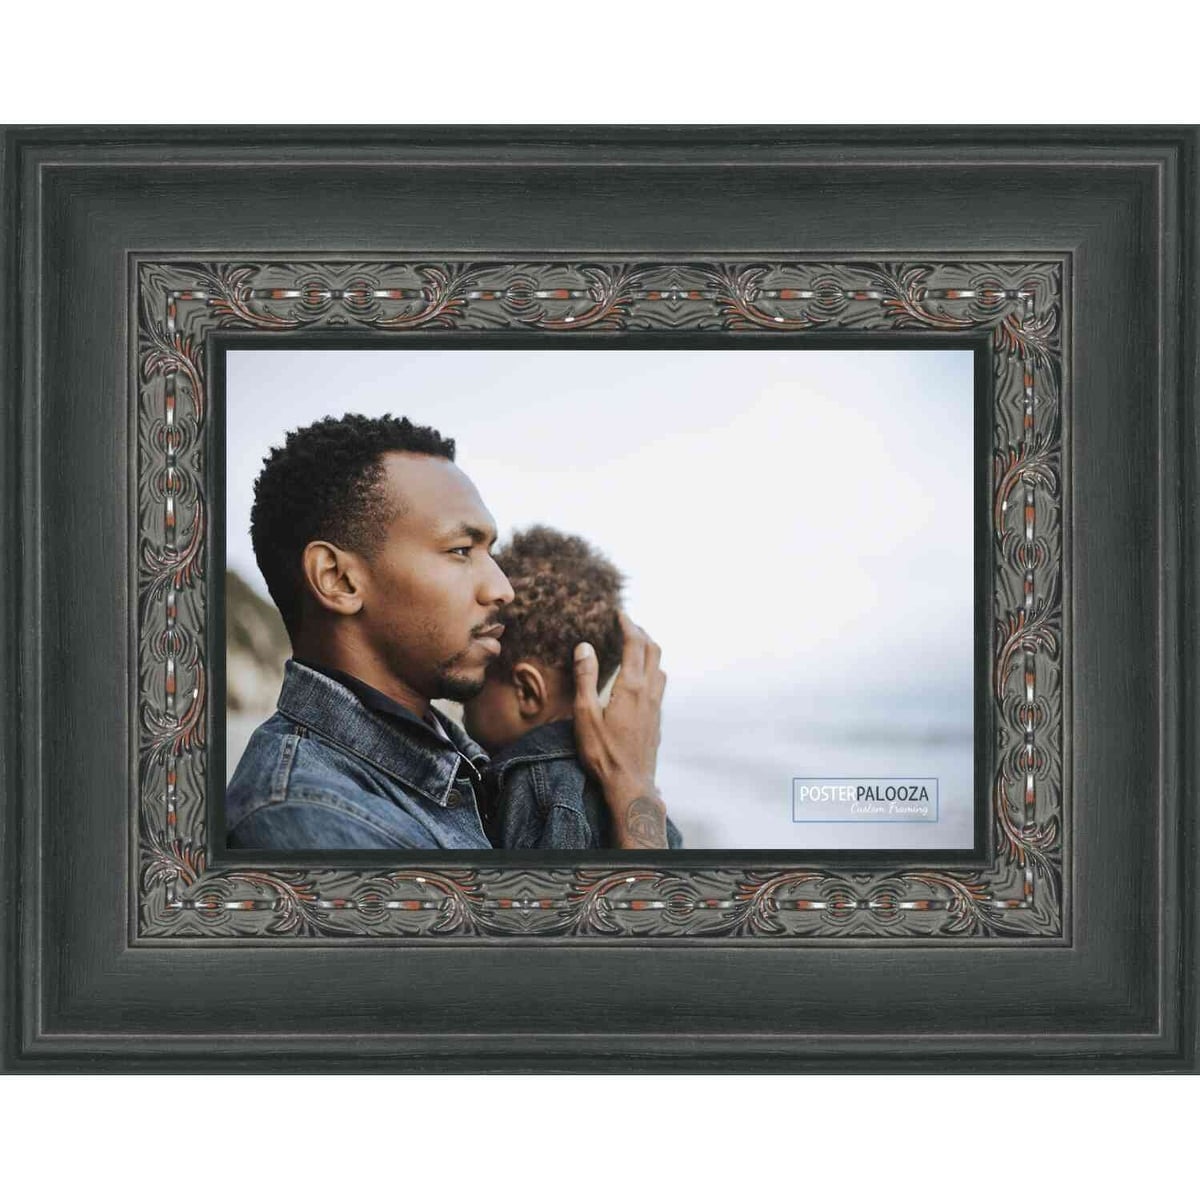 6x10 Distressed/Aged Black Complete Wood Picture Frame with UV Acrylic, Foam Board Backing, & Hardware